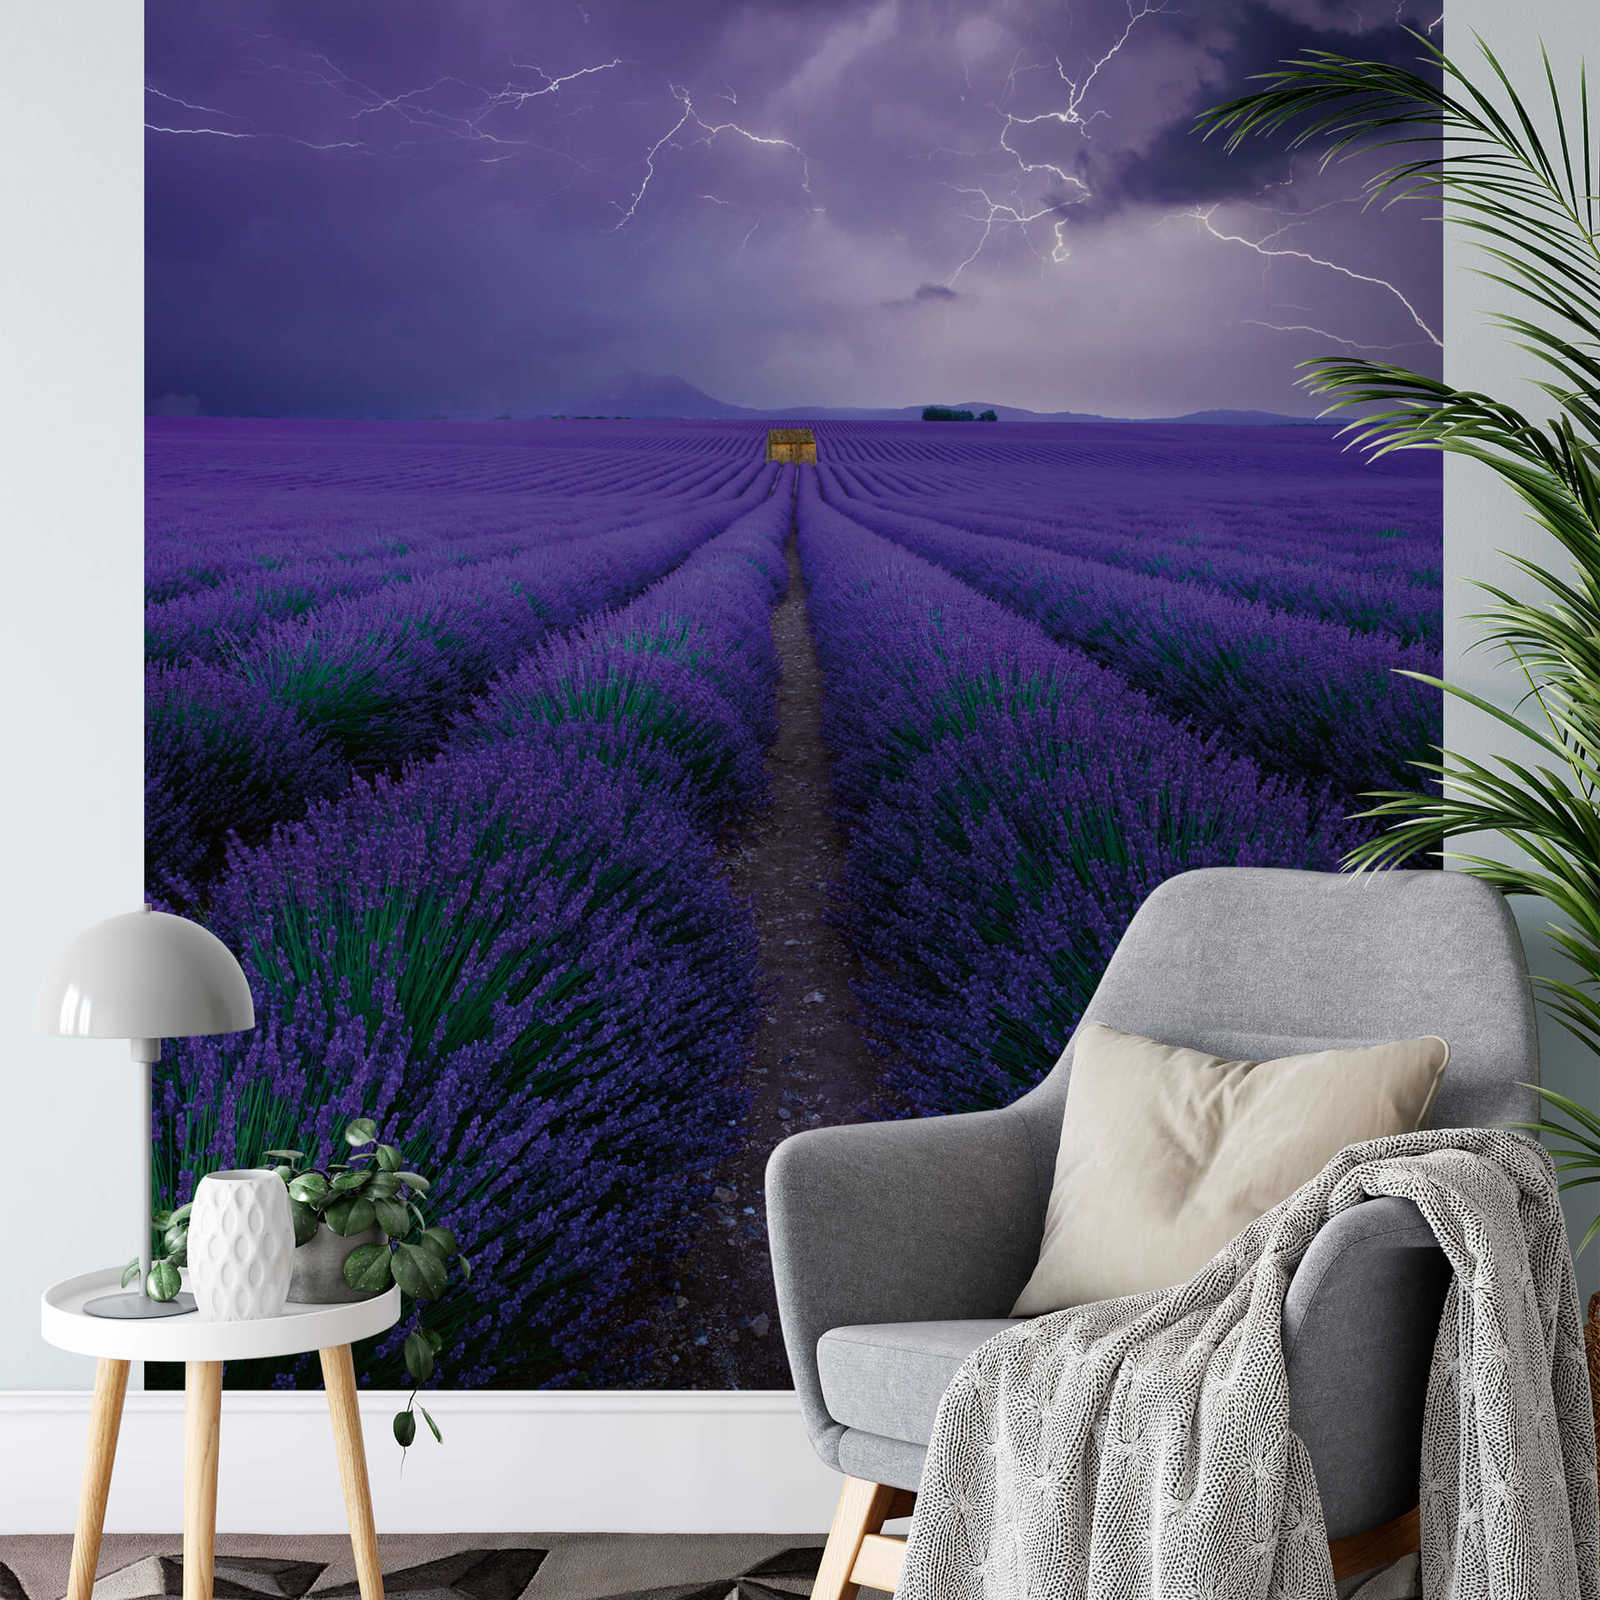             Photo wallpaper Field with lavender - purple, green, brown
        